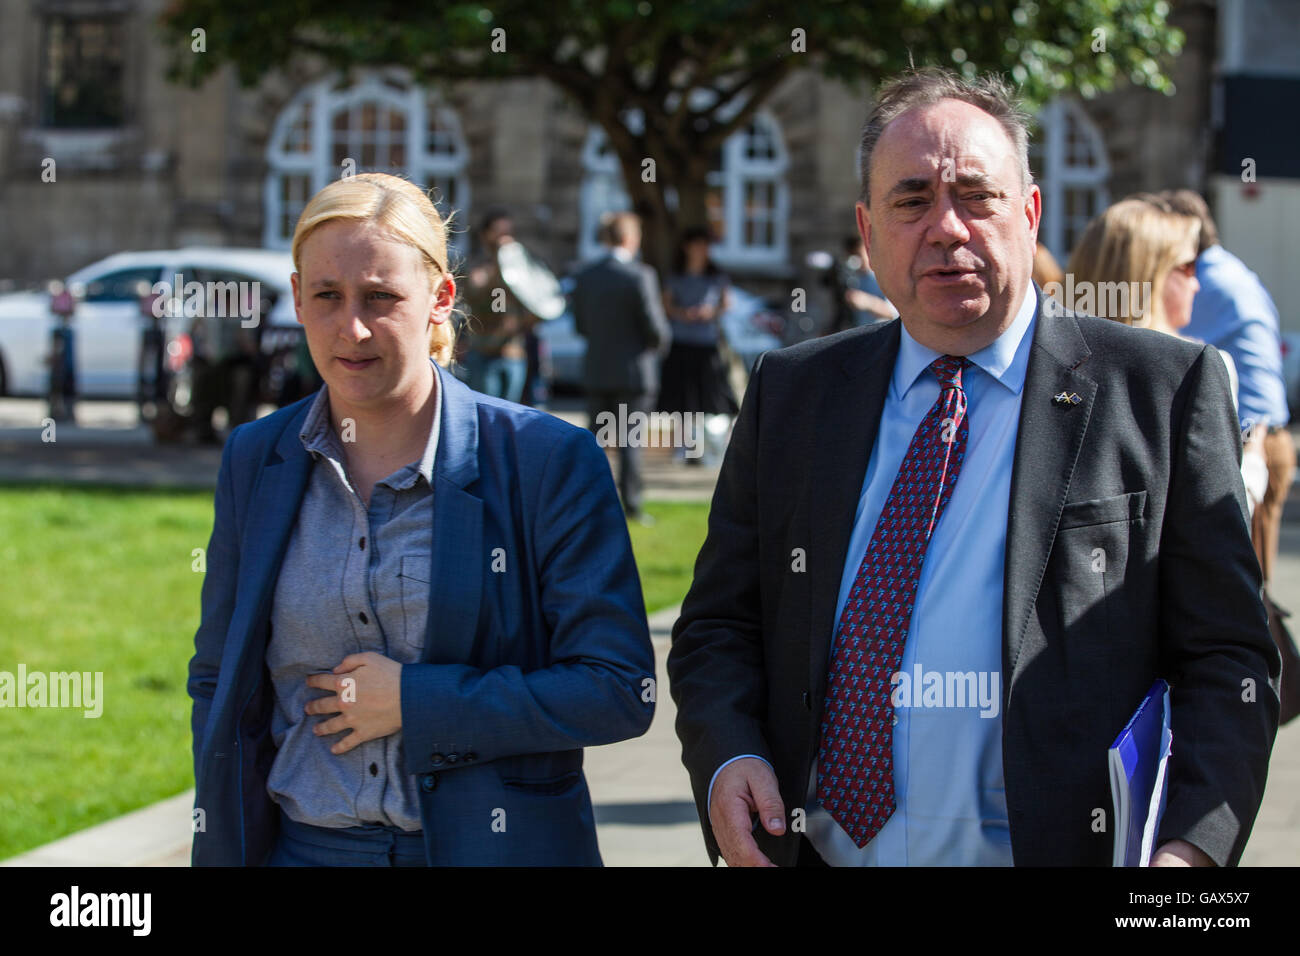 London, UK. 6th July, 2016. Mhairi Black, SNP MP for Paisley and Renfrewshire South, and Alex Salmond, SNP MP for Gordon, outside Parliament on the day of publication of the Chilcot Report. Alex Salmond had just called for legal action to be taken against former Prime Minister Tony Blair. Credit:  Mark Kerrison/Alamy Live News Stock Photo